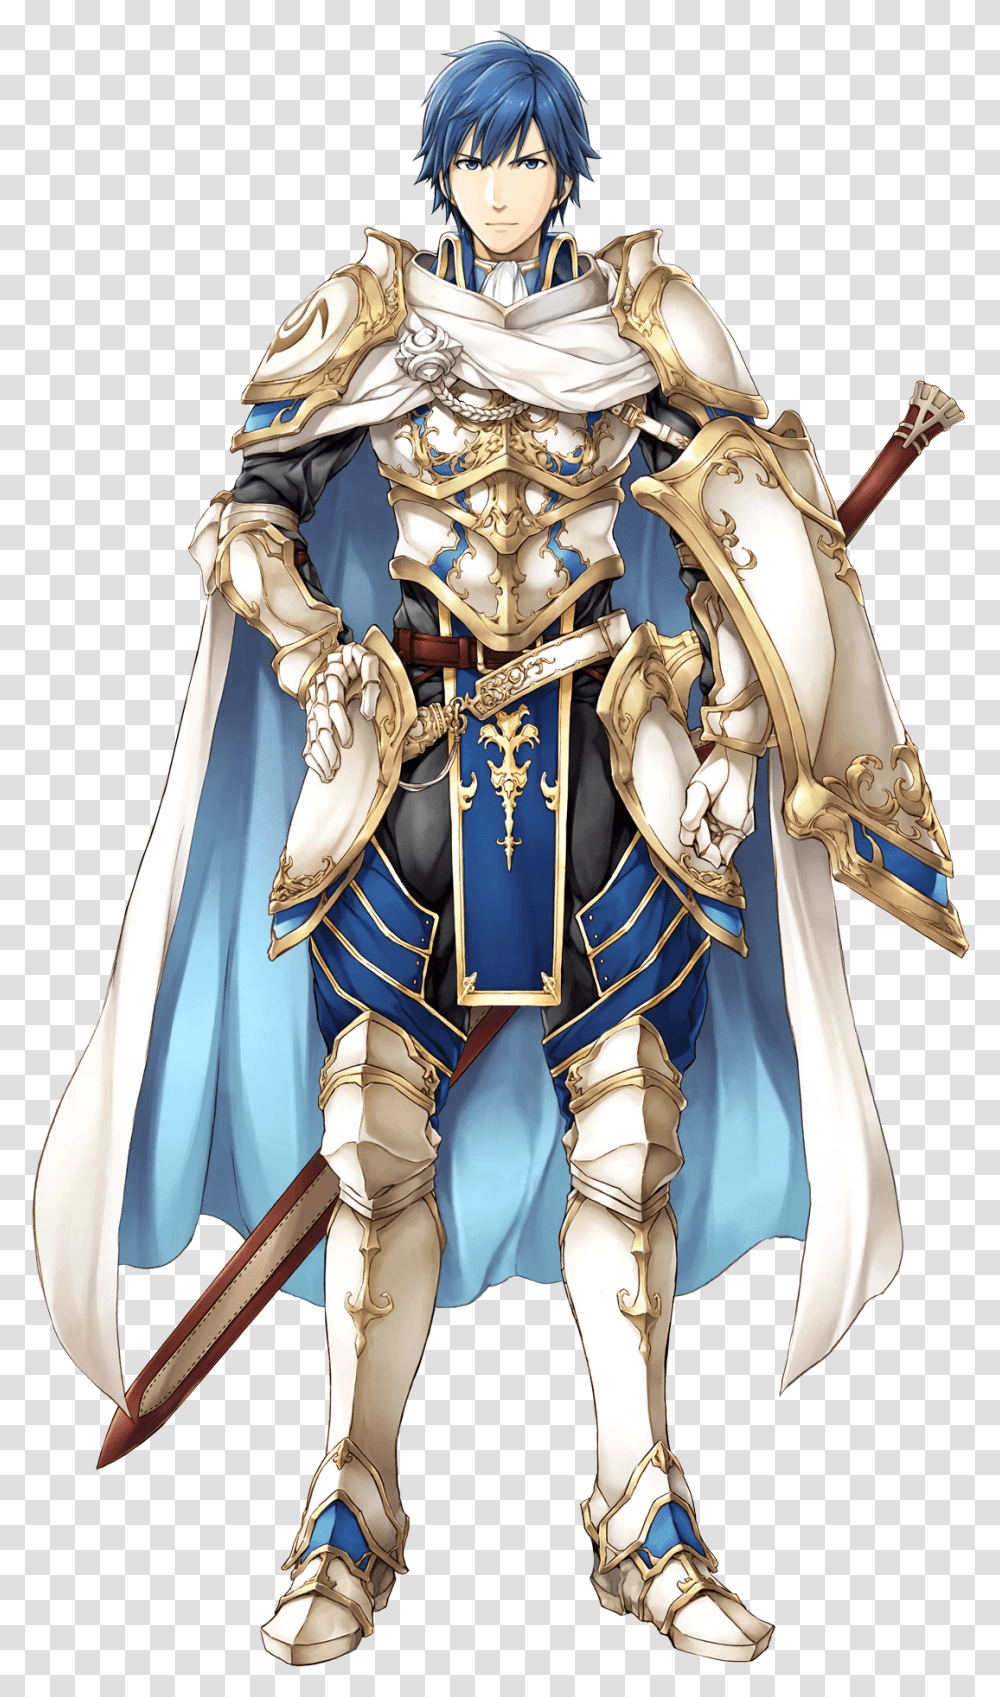 Exalted Chrom Fire Emblem Heroes Wiki Gamepress Fire Emblem Heroes Chrom, Person, Human, Knight, Costume Transparent Png